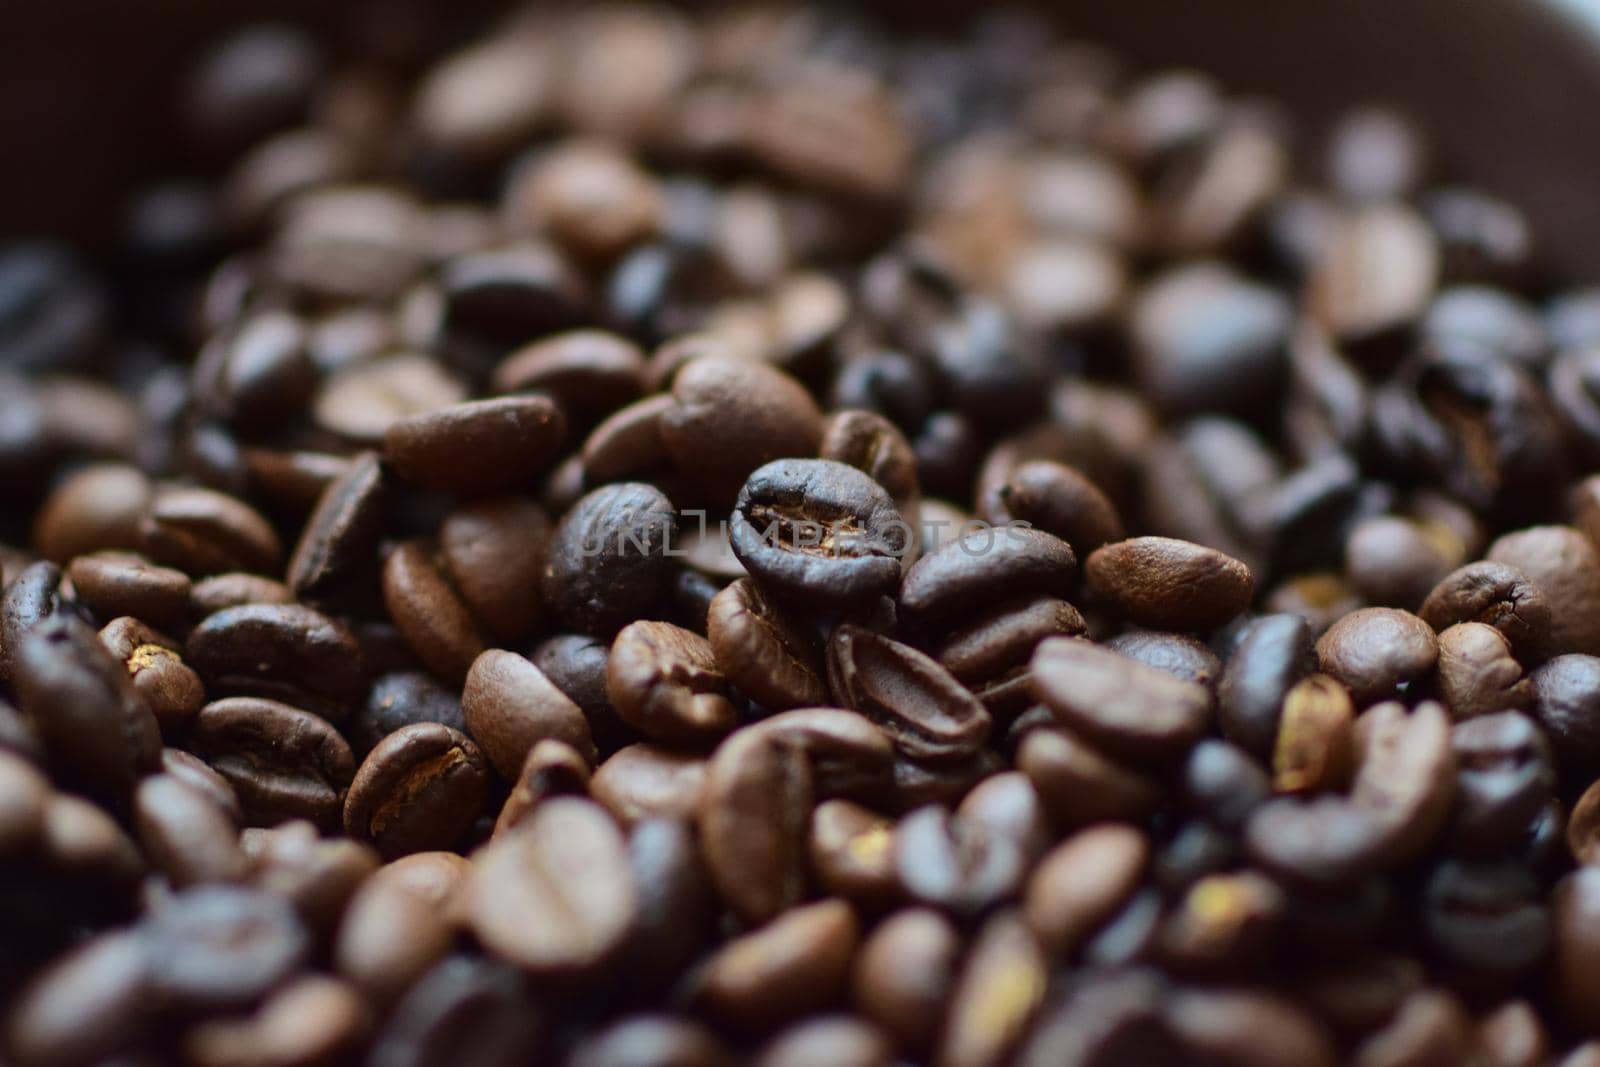 Roasted coffee beans as a close-up